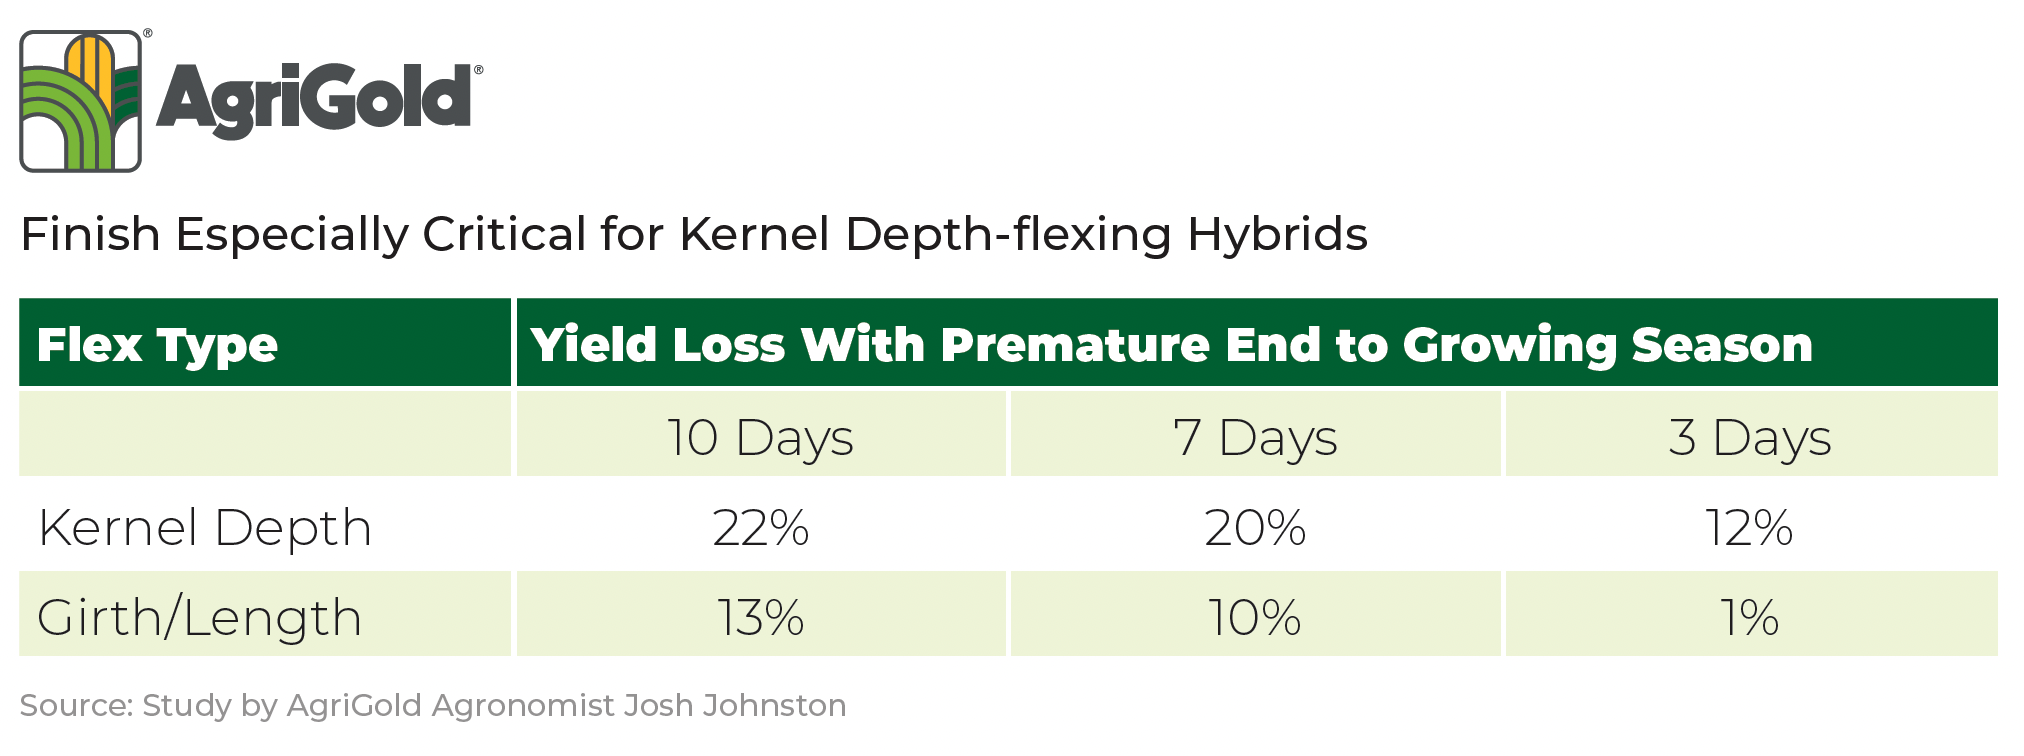 A chart depicting flex type and yield loss with premature end to growing season